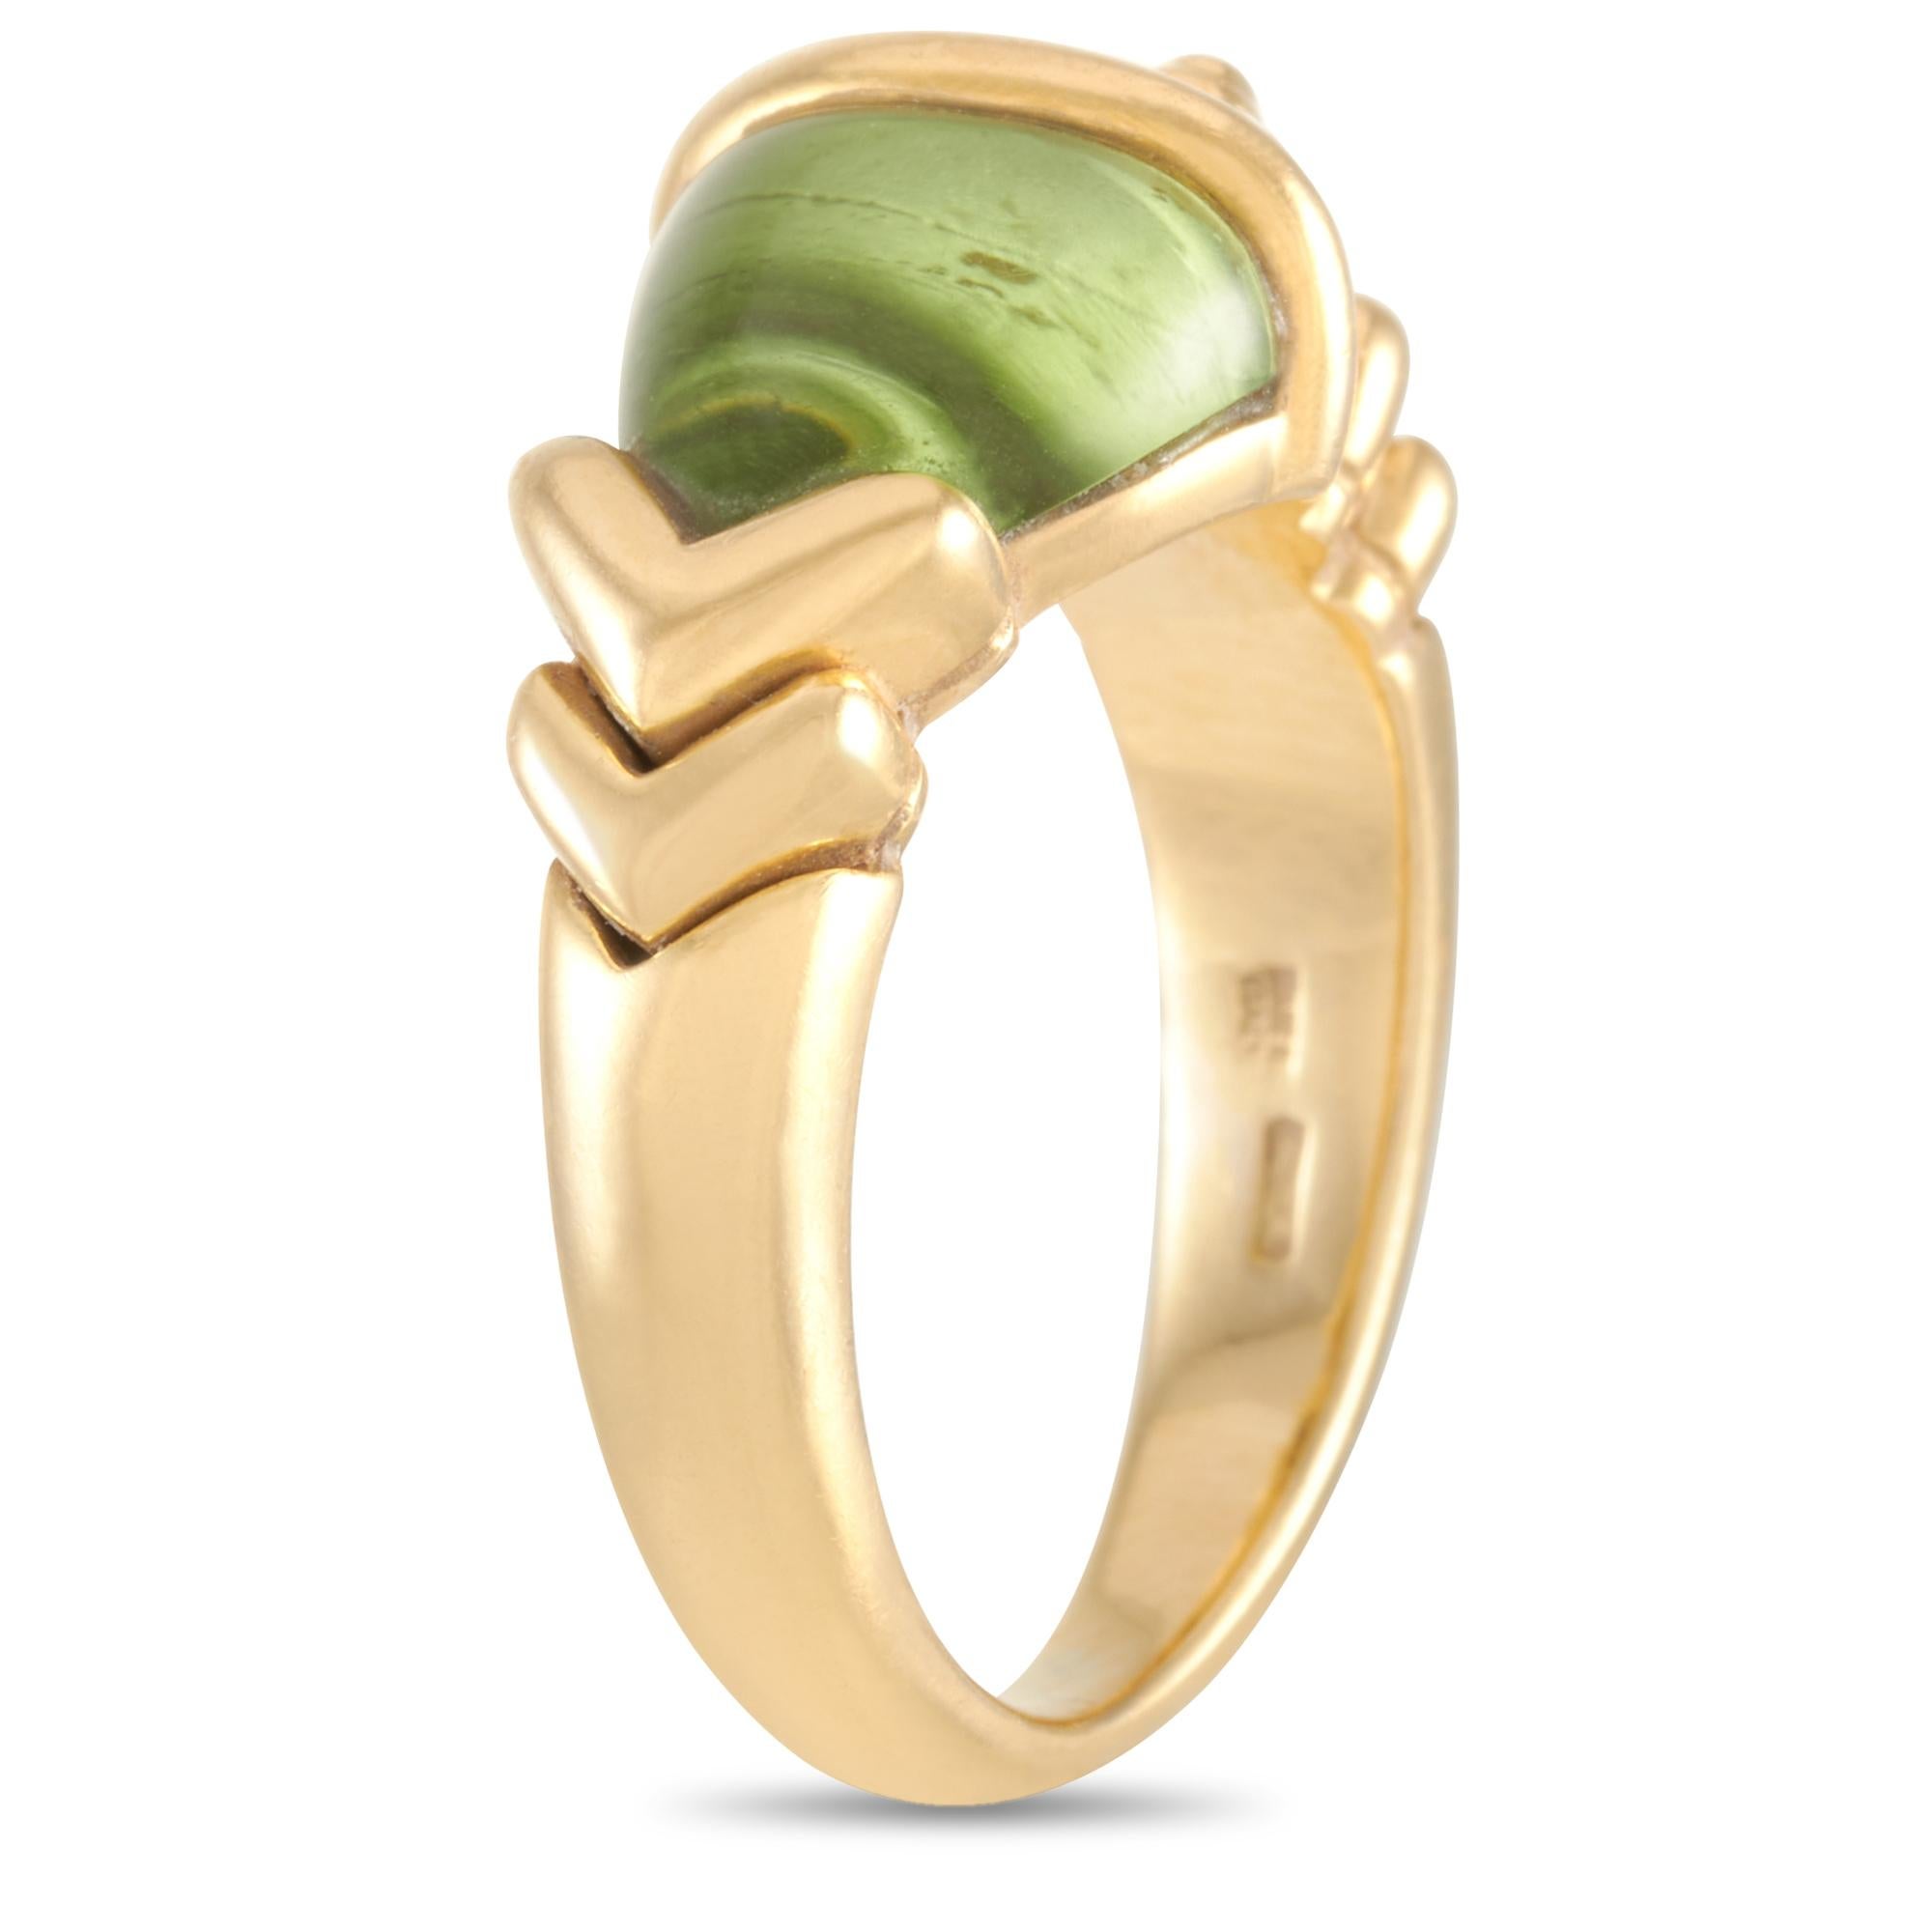 This Bvlgari ring is crafted from 18K yellow gold and set with a peridot. The ring weighs 7.7 grams and boasts band thickness of 4 mm and top height of 7 mm, while top dimensions measure 10 by 20 mm.

Offered in estate condition, this item includes